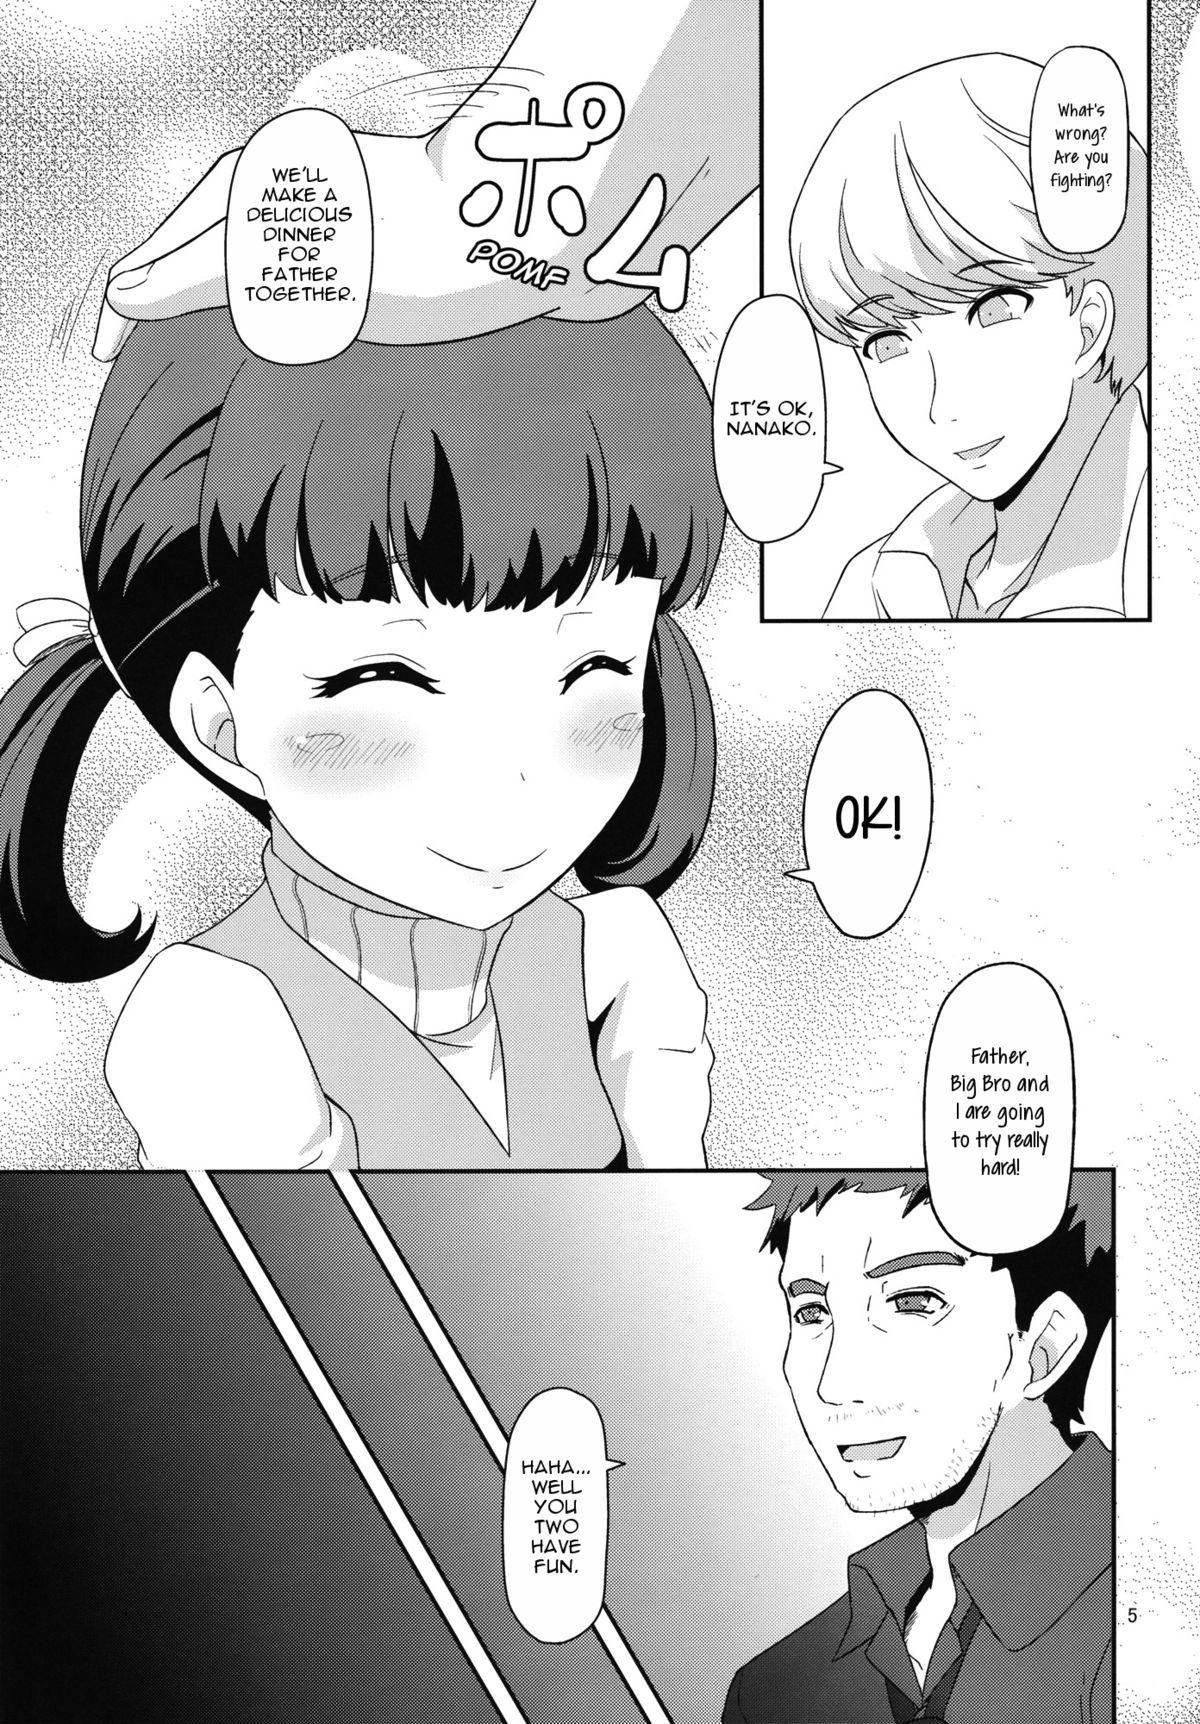 Celebrity Nudes Oyomesan no Narikata | How to Become a Wife - Persona 4 Pay - Page 4